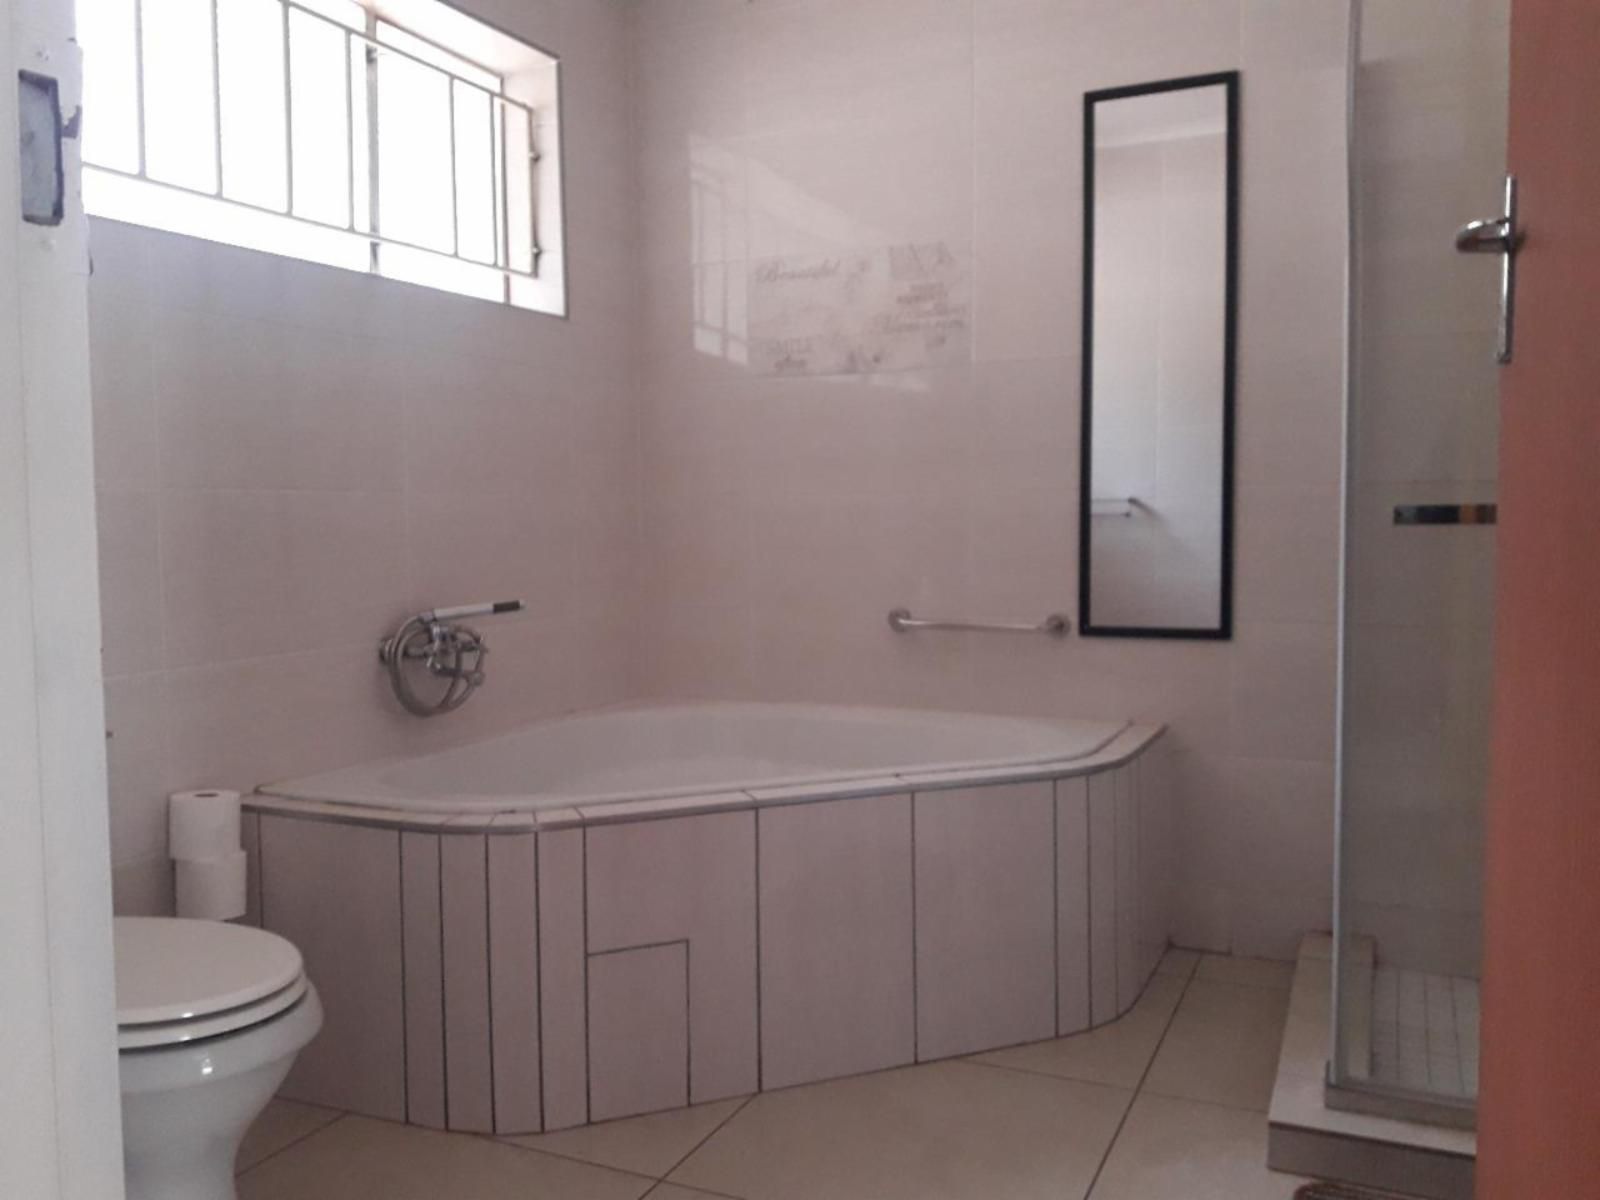 R S Gardens Thohoyandou Limpopo Province South Africa Unsaturated, Bathroom